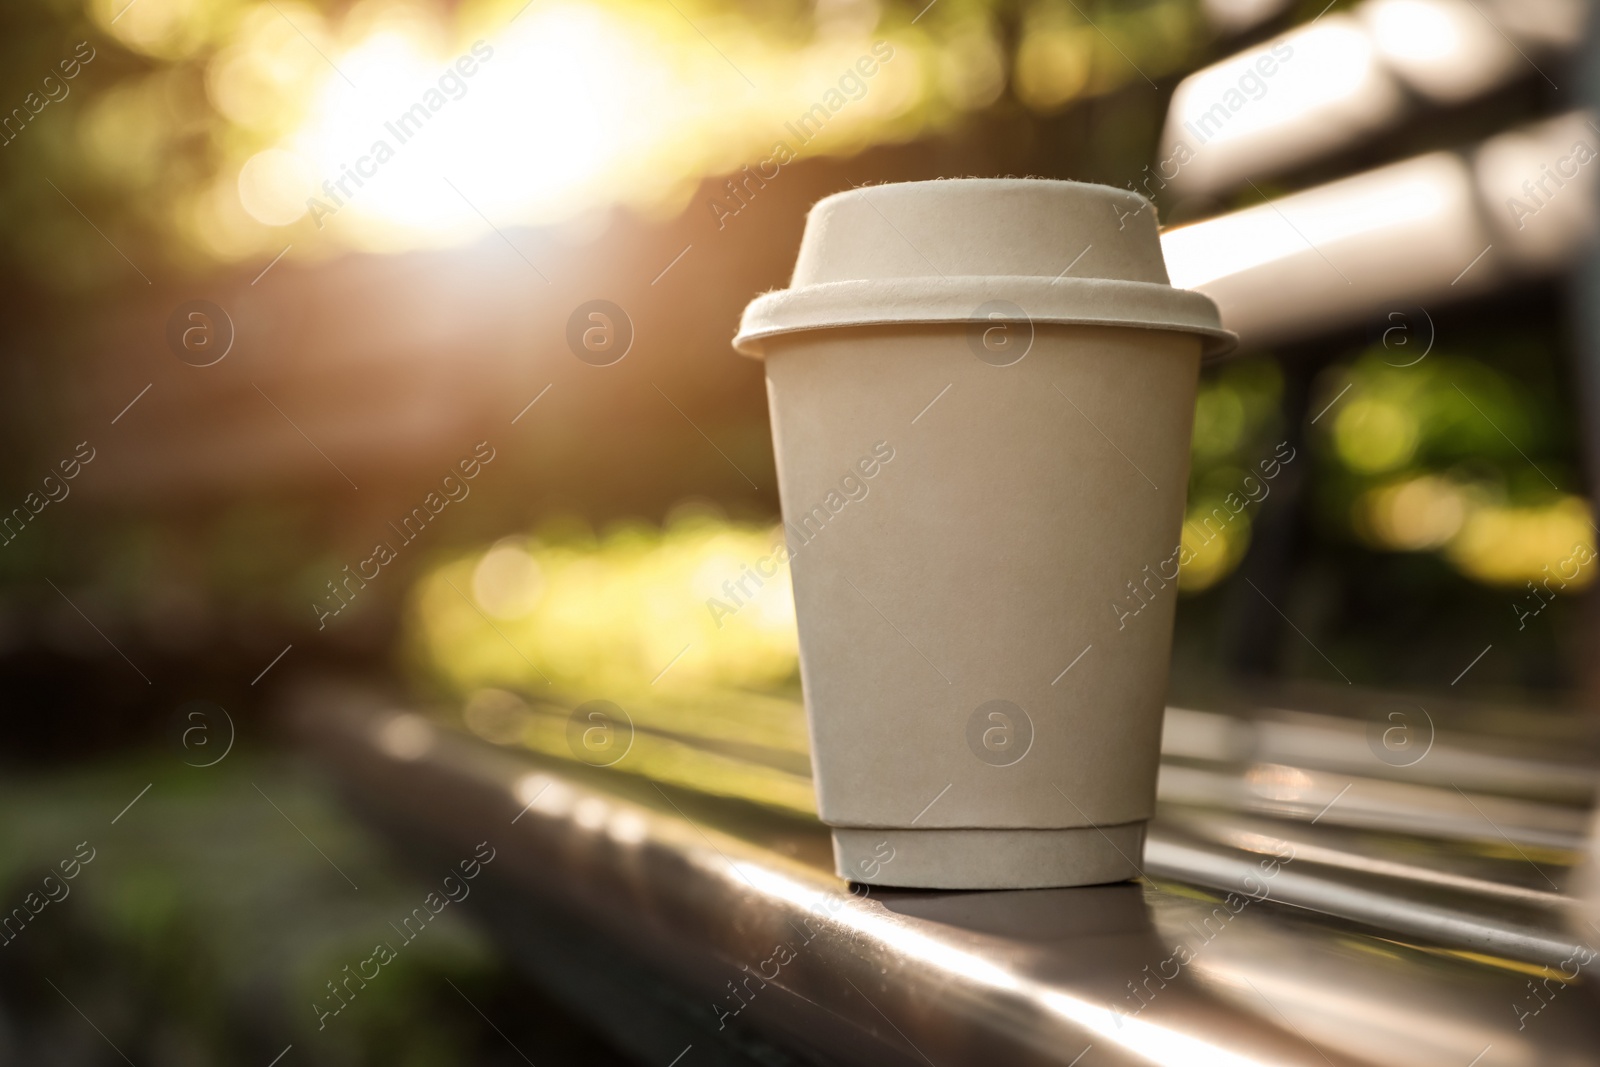 Photo of Cardboard takeaway coffee cup with lid on wooden bench outdoors, space for text